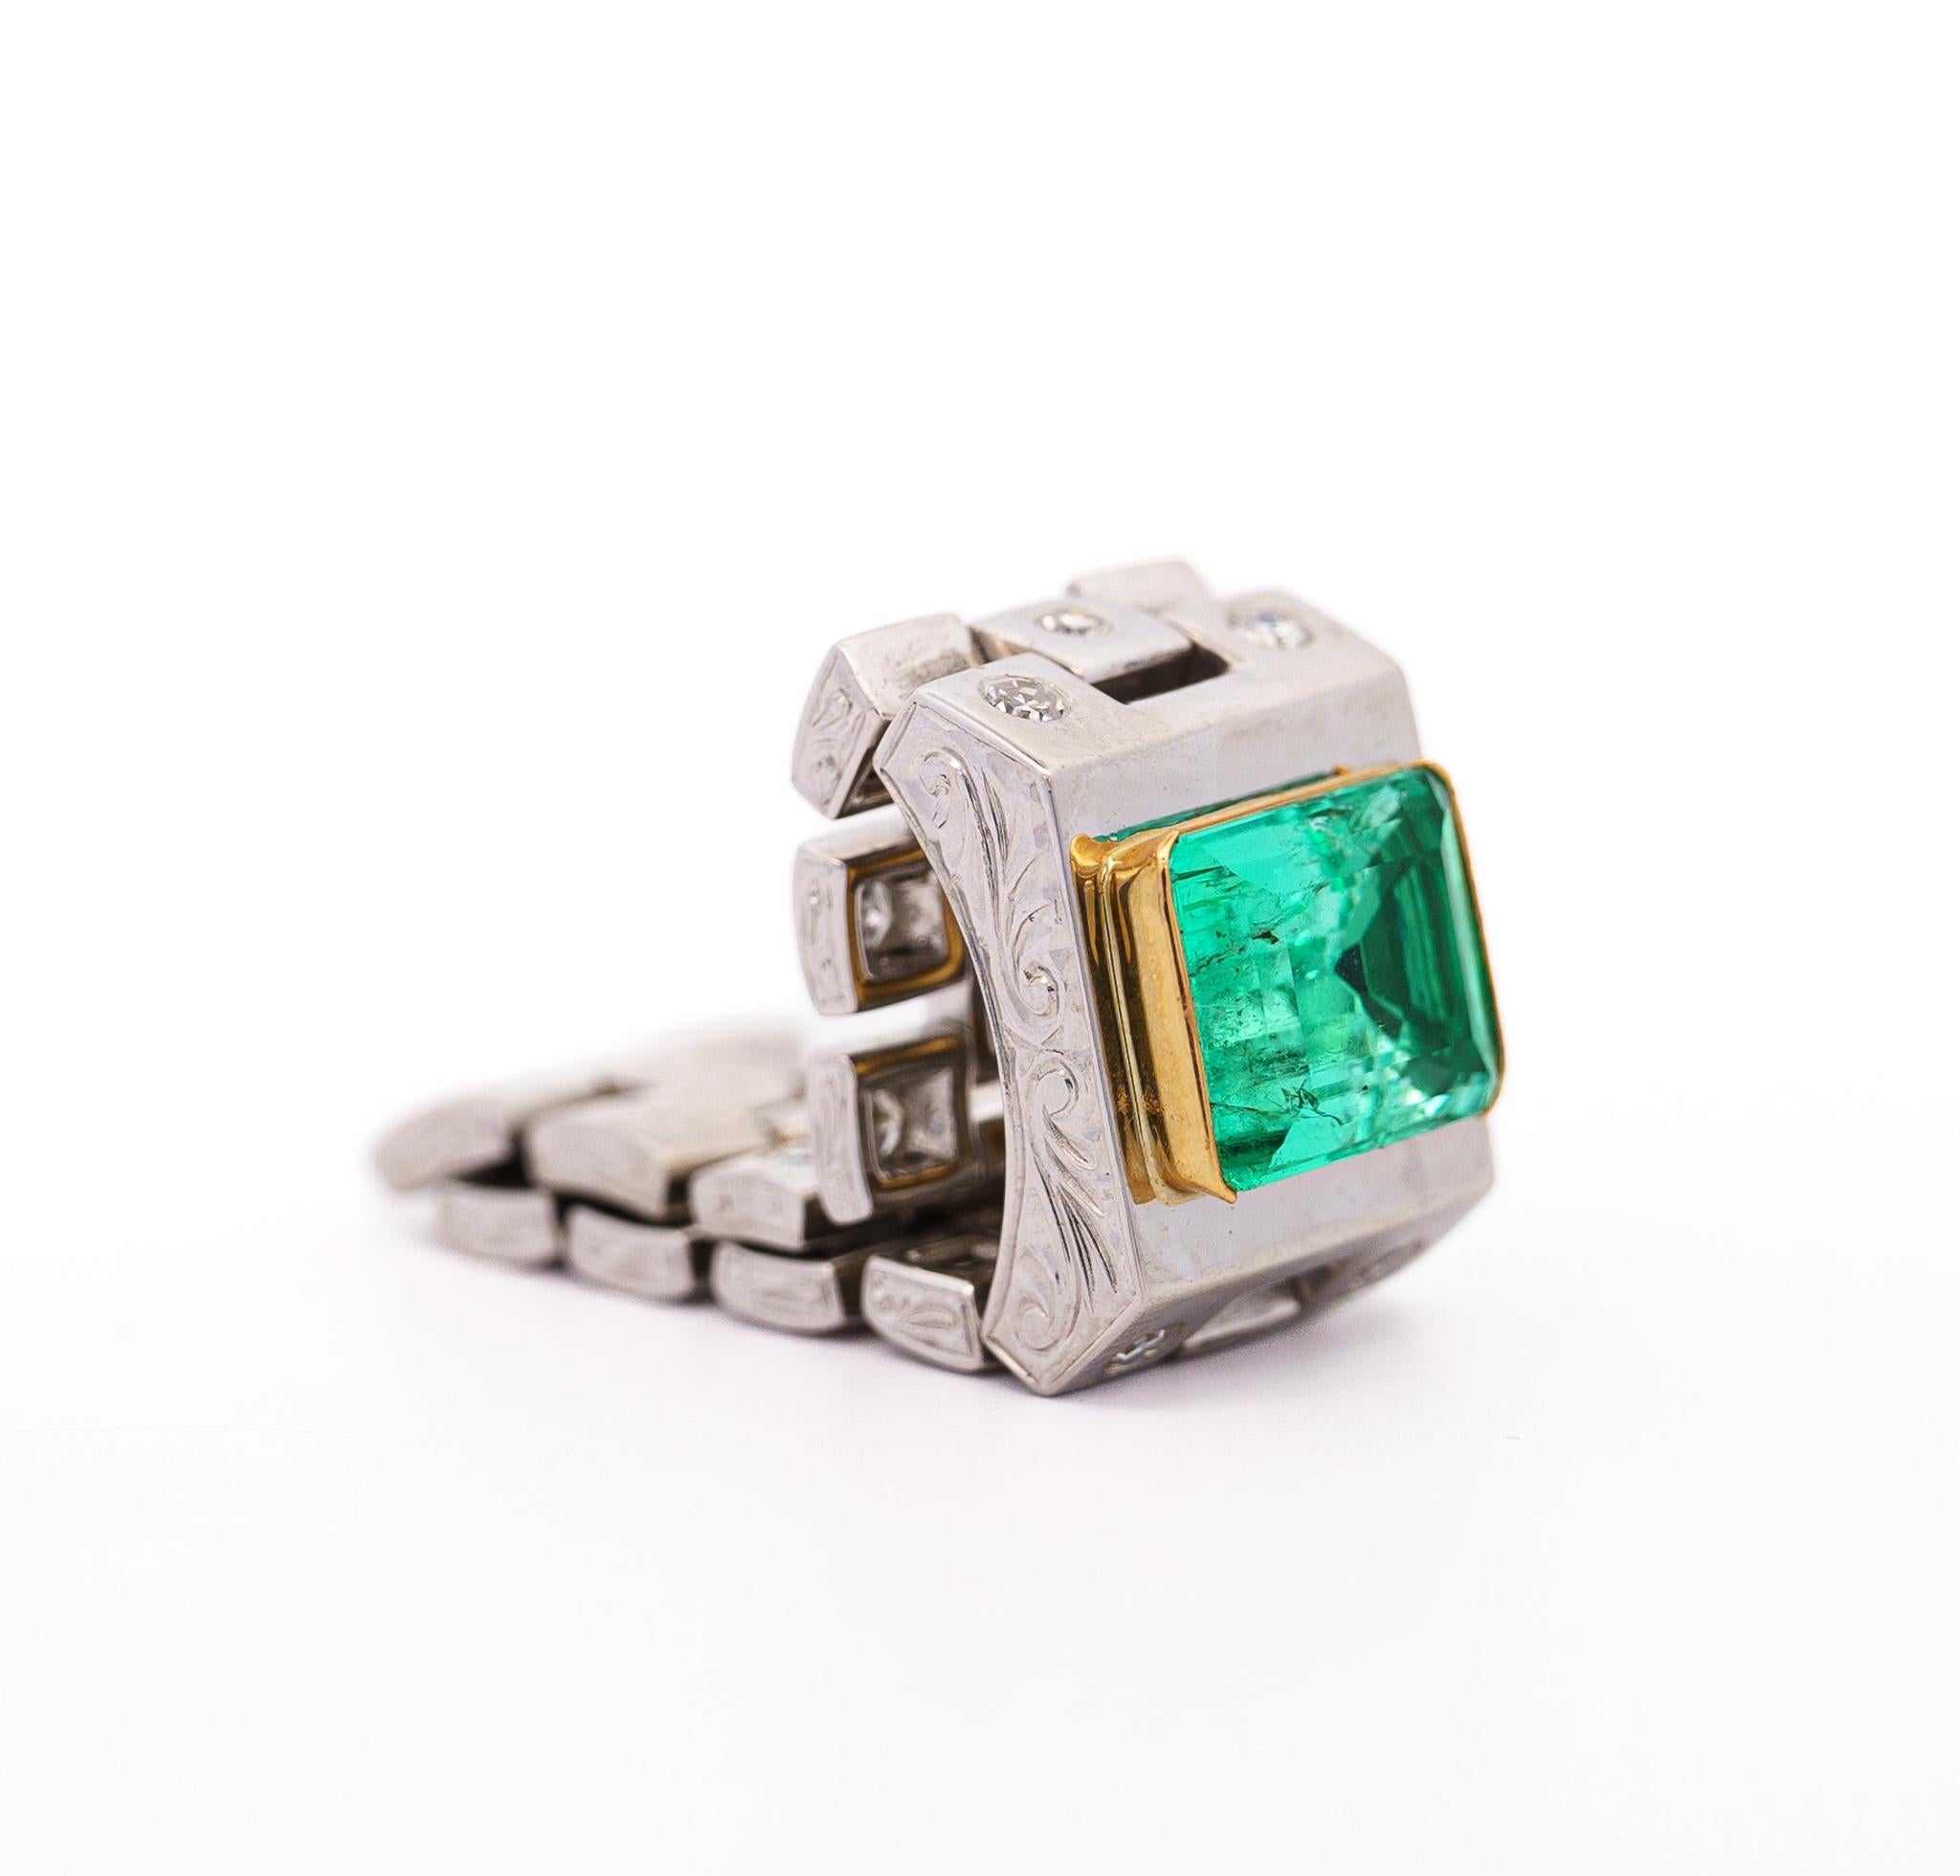 GRS certified natural Colombian Emerald mounted in an 18k gold and platinum link ring setting. This legendary Emerald is of Colombian origin and has insignificant oil treatment. The Emerald has excellent brilliance, color, and luster. It was mined